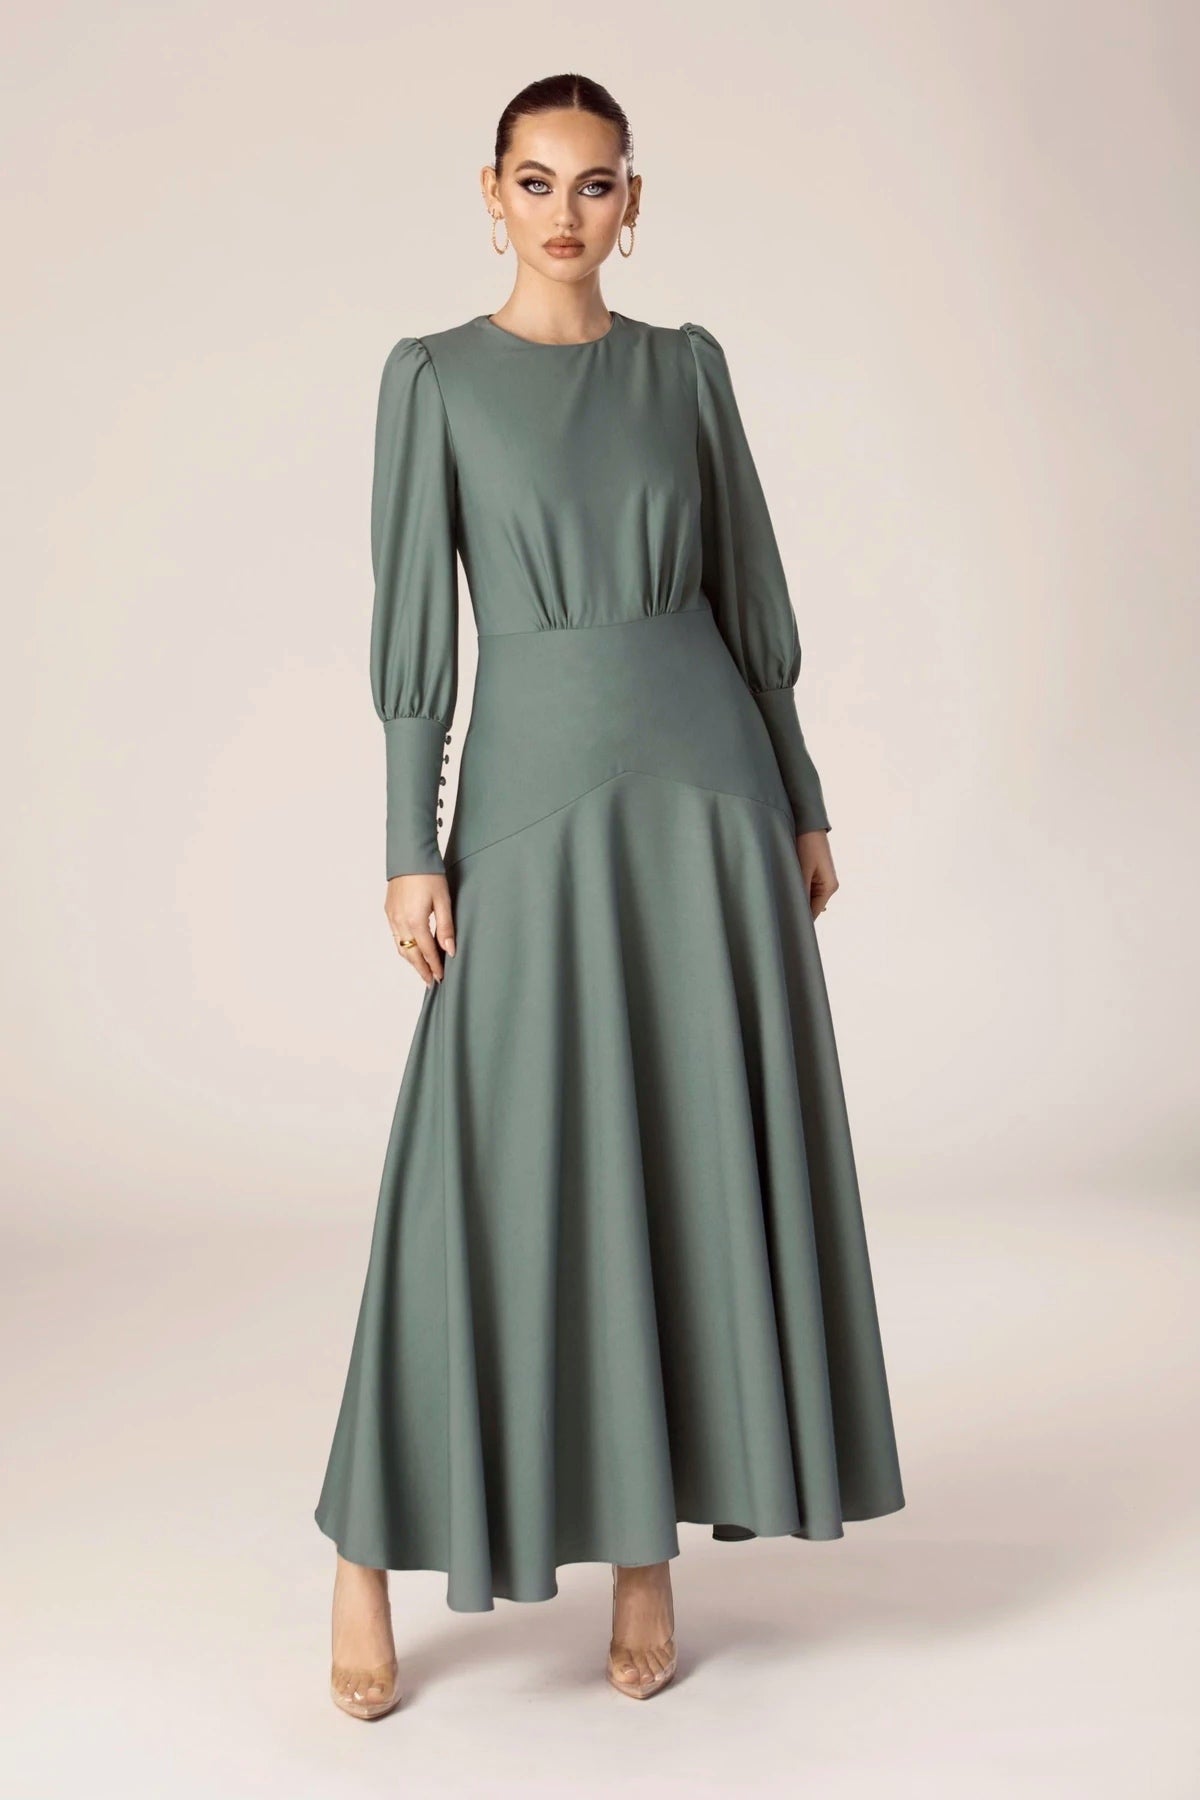 Veiled | Modest Maxi Dresses 4 Women – Page for